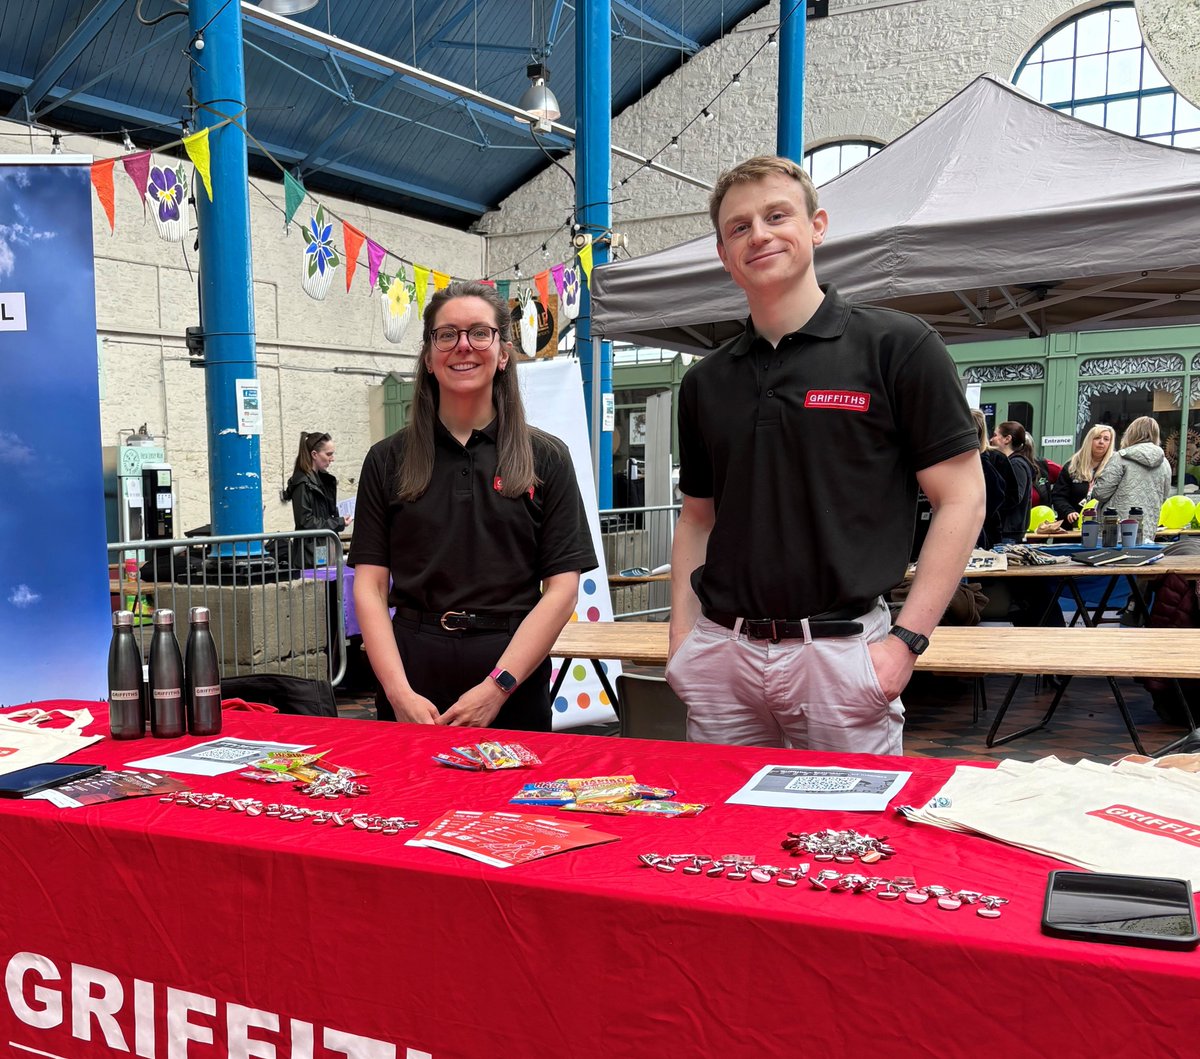 Our Learning & Development Team recently attended the Abergavenny Jobs Fair to showcase the exciting opportunities and varying careers available at Griffiths. Hosted by @MonmouthshireCC , the Jobs Fair provided a valuable platform to connect with a pool of motivated candidates.